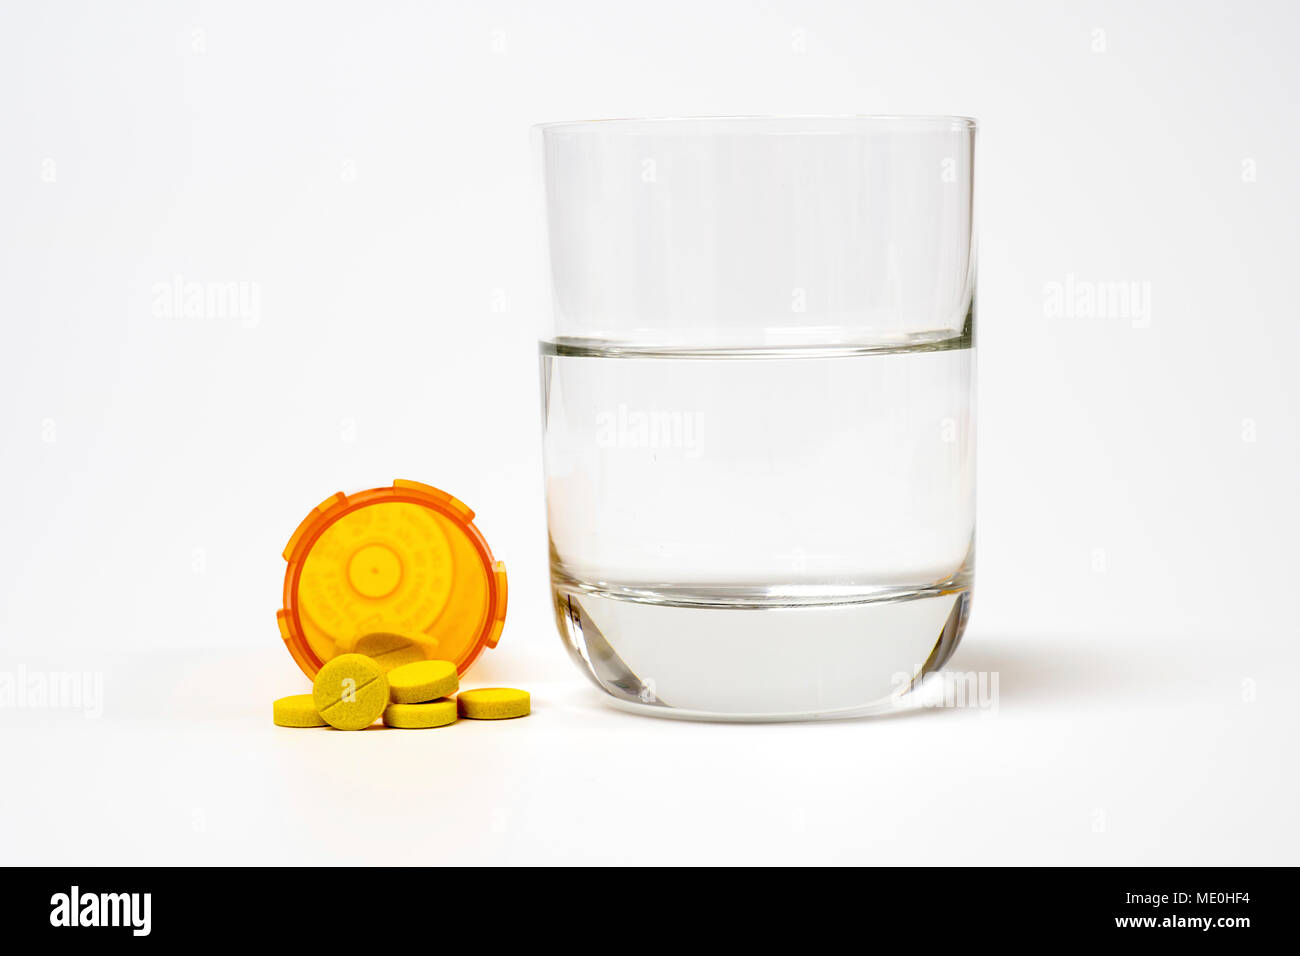 Medication and glass of water on a white background. Stock Photo